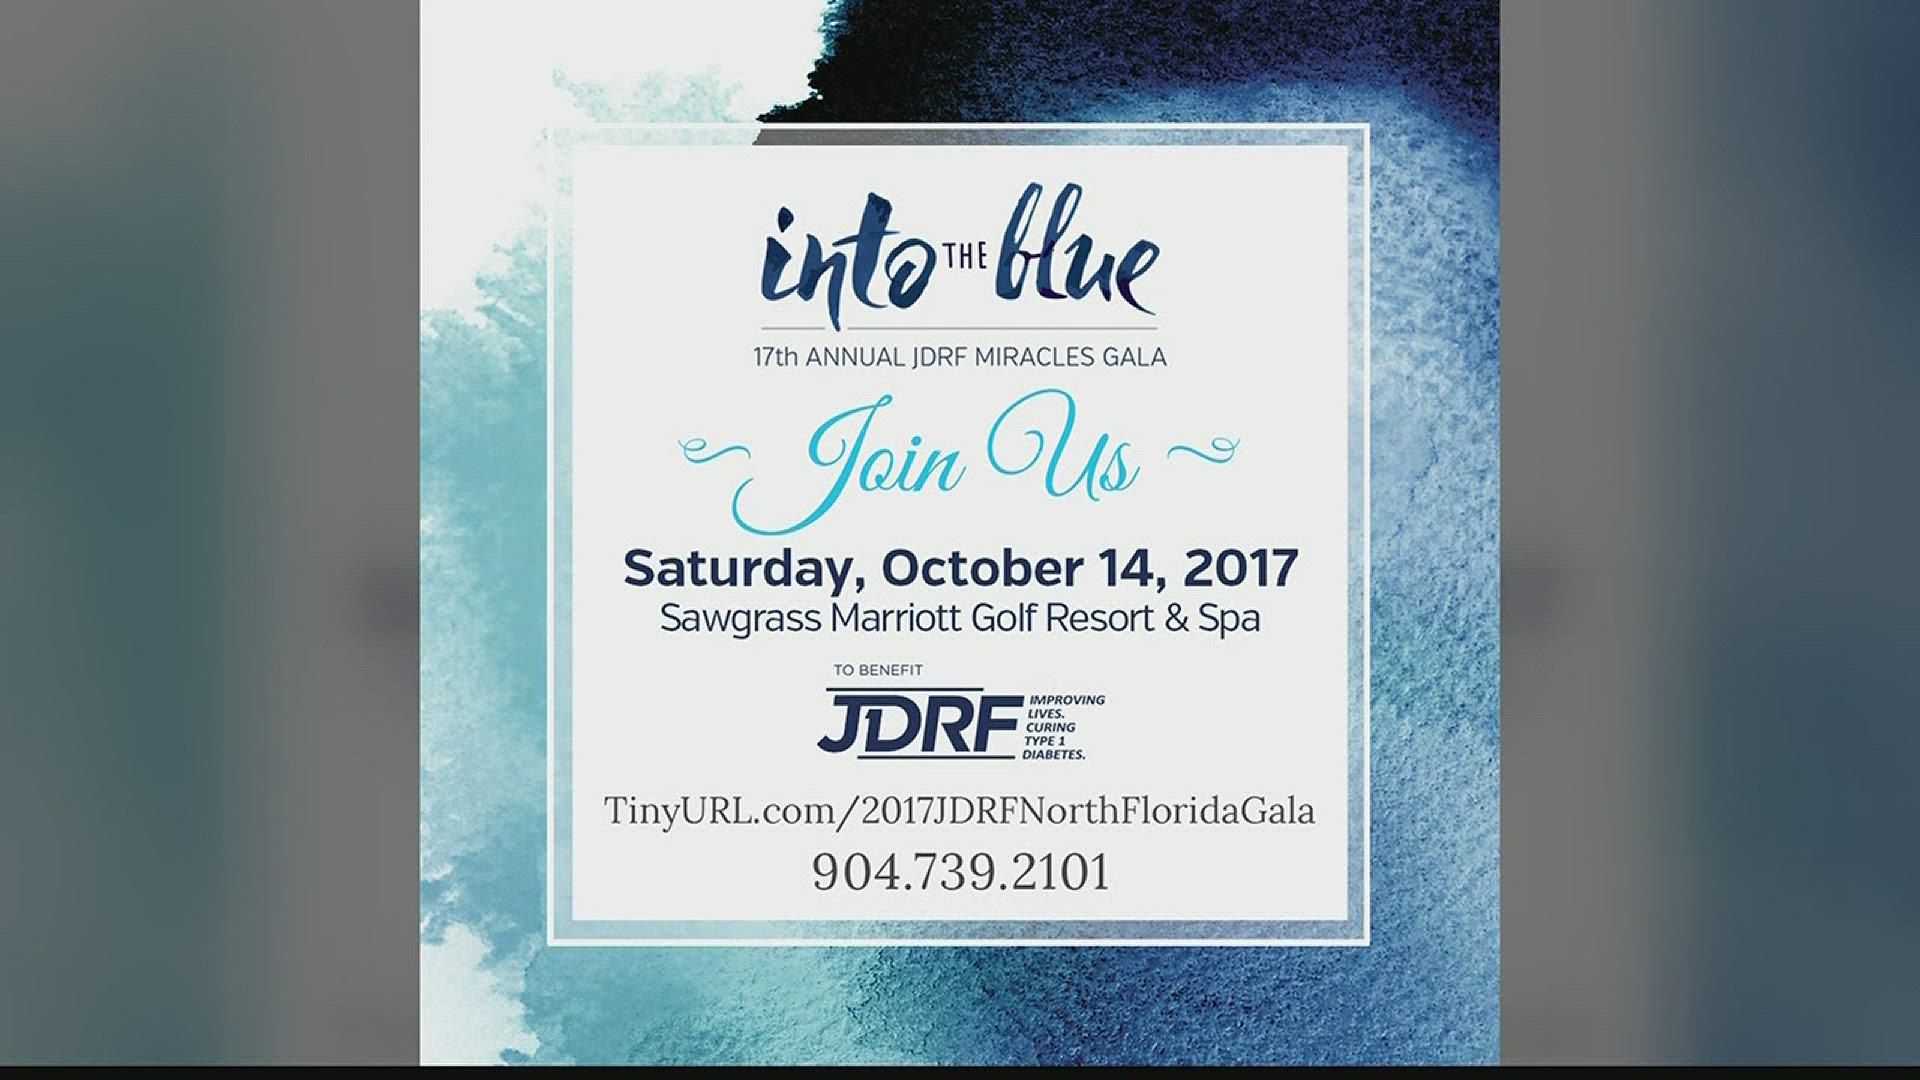 Money raised at the gala will be put towards research for Juvenile Diabetes. Katie Bush and Kasey Repass on Good Morning Jacksonville. 10/7/17